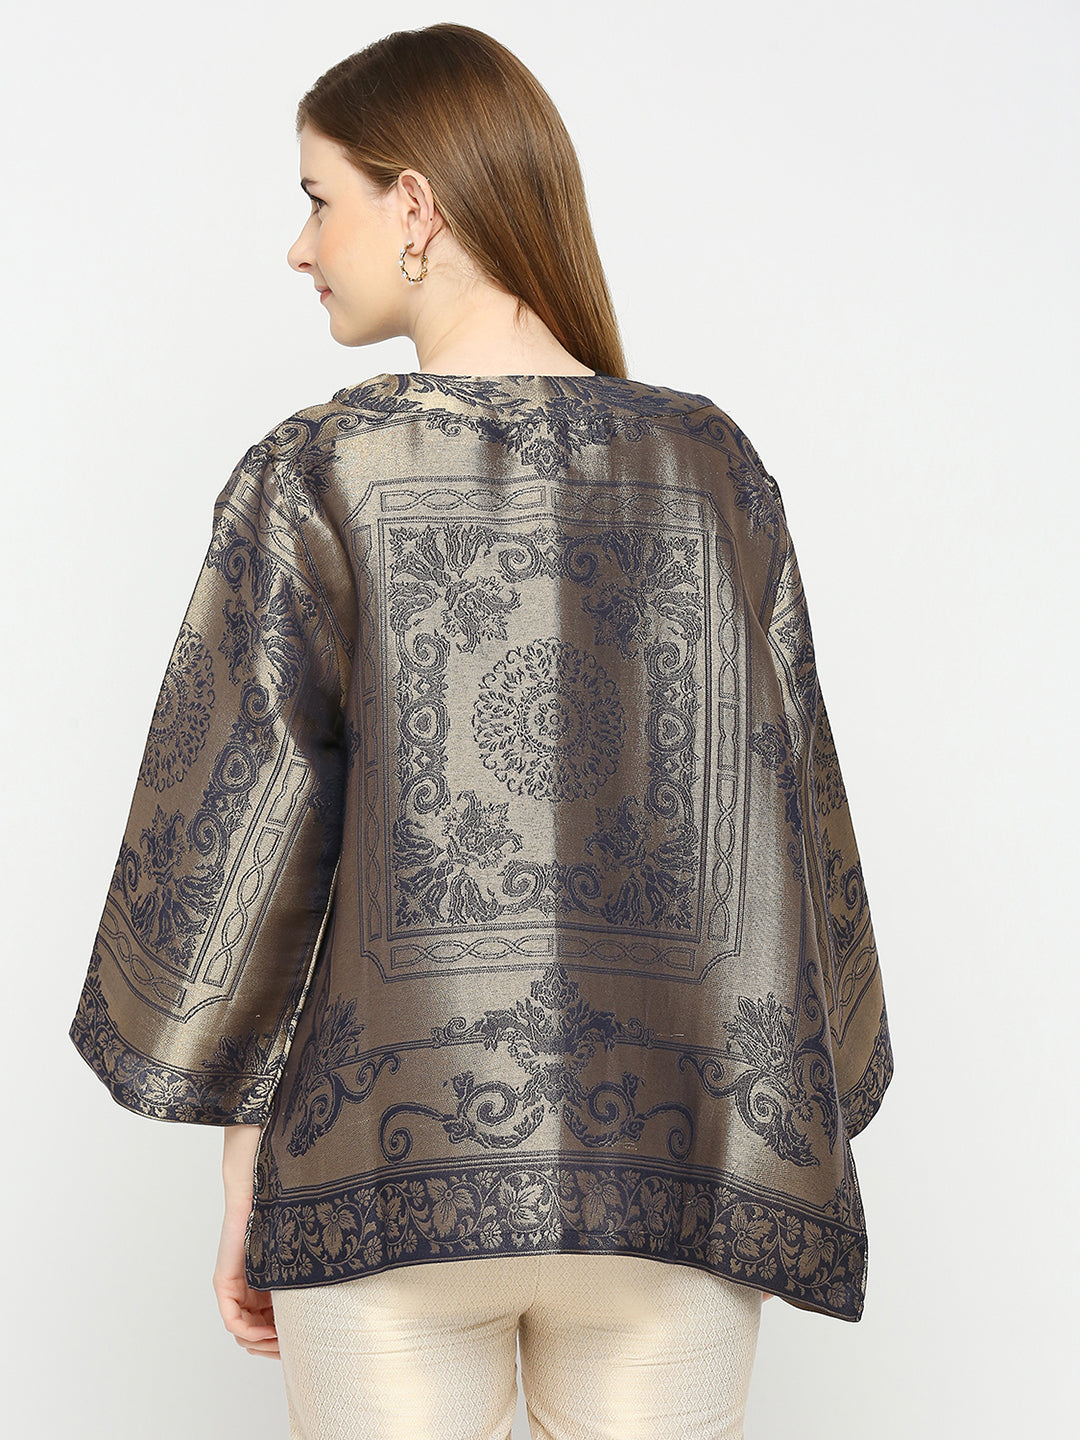 Brocade Navy Blue French Patterned Jacket